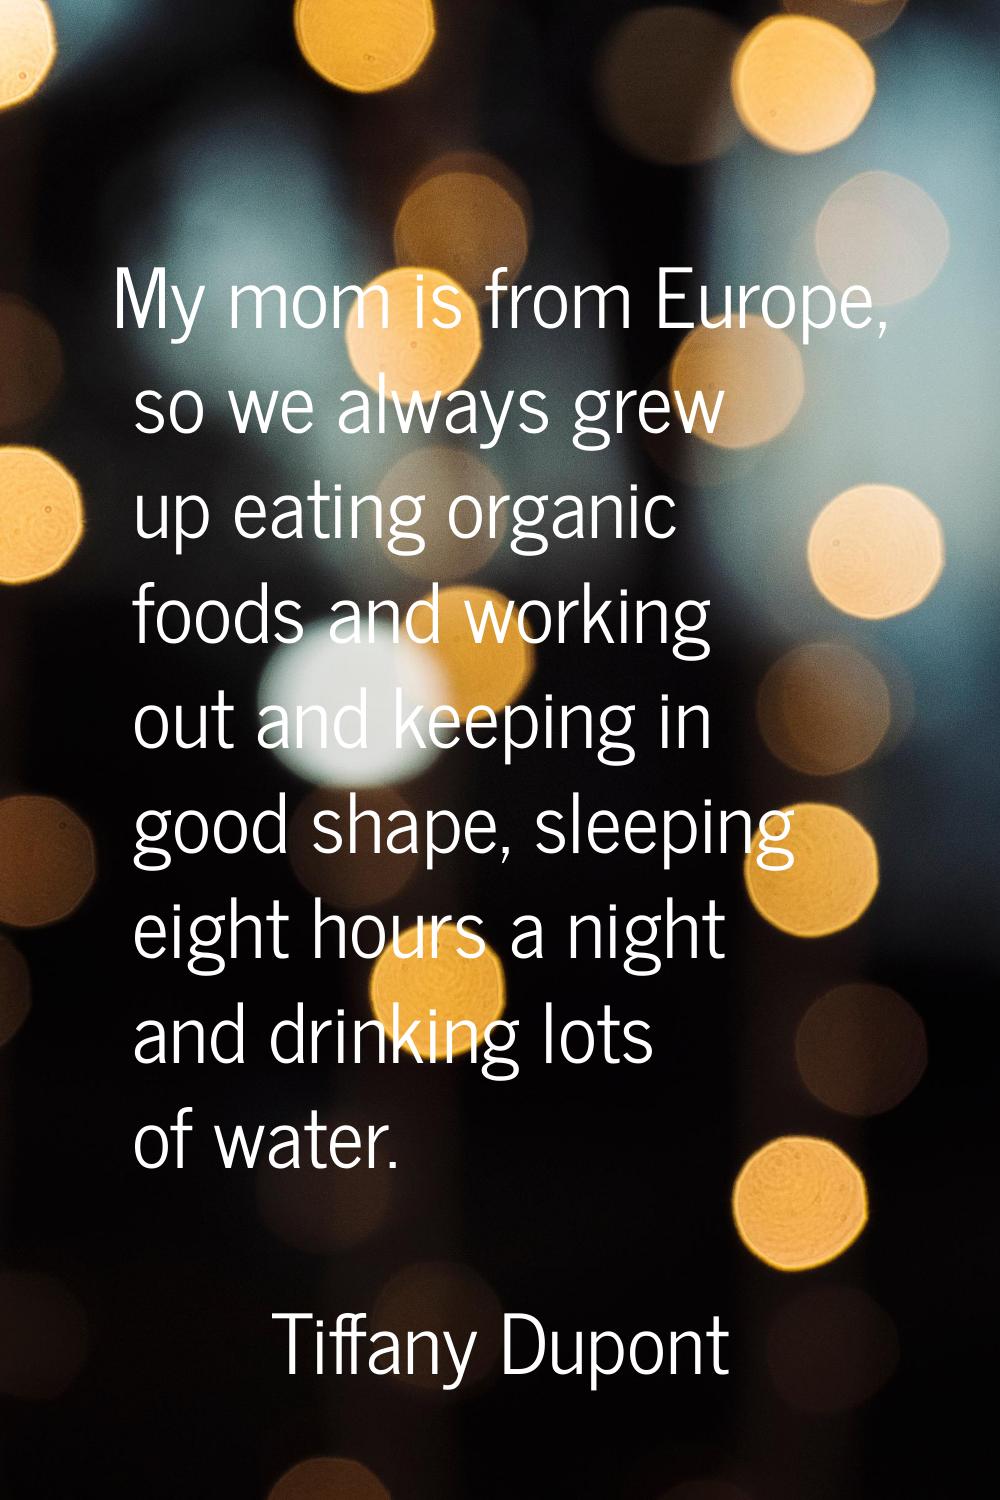 My mom is from Europe, so we always grew up eating organic foods and working out and keeping in goo